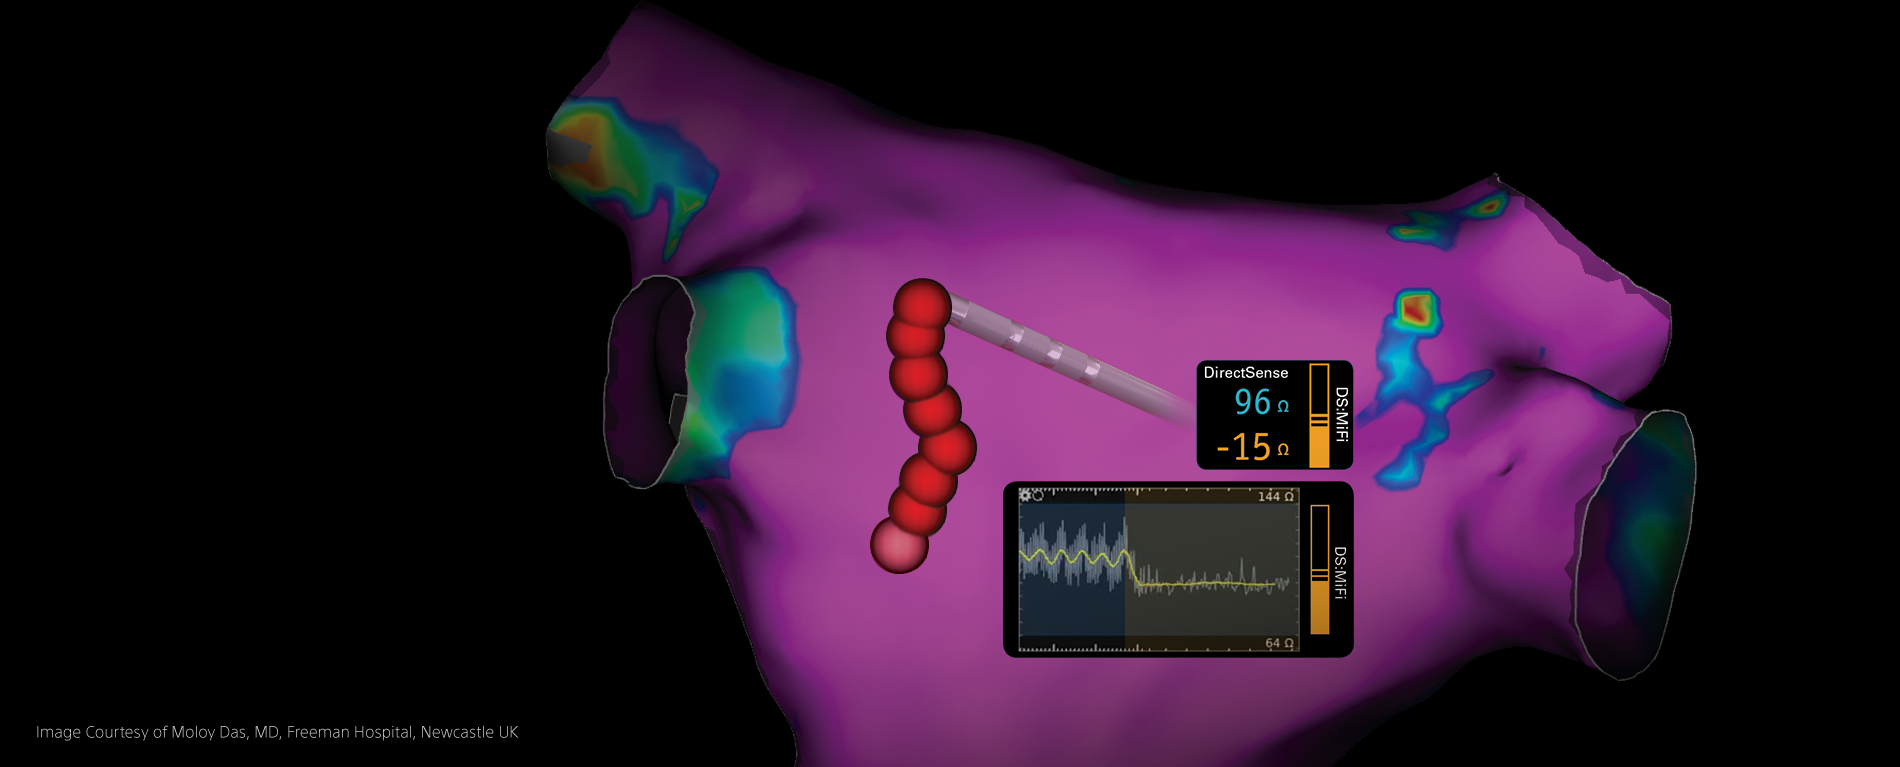 DIRECTSENSE™ Technology widgets showing the ohm drop during an RF ablation procedure with a high-definition cardiac map in the background.